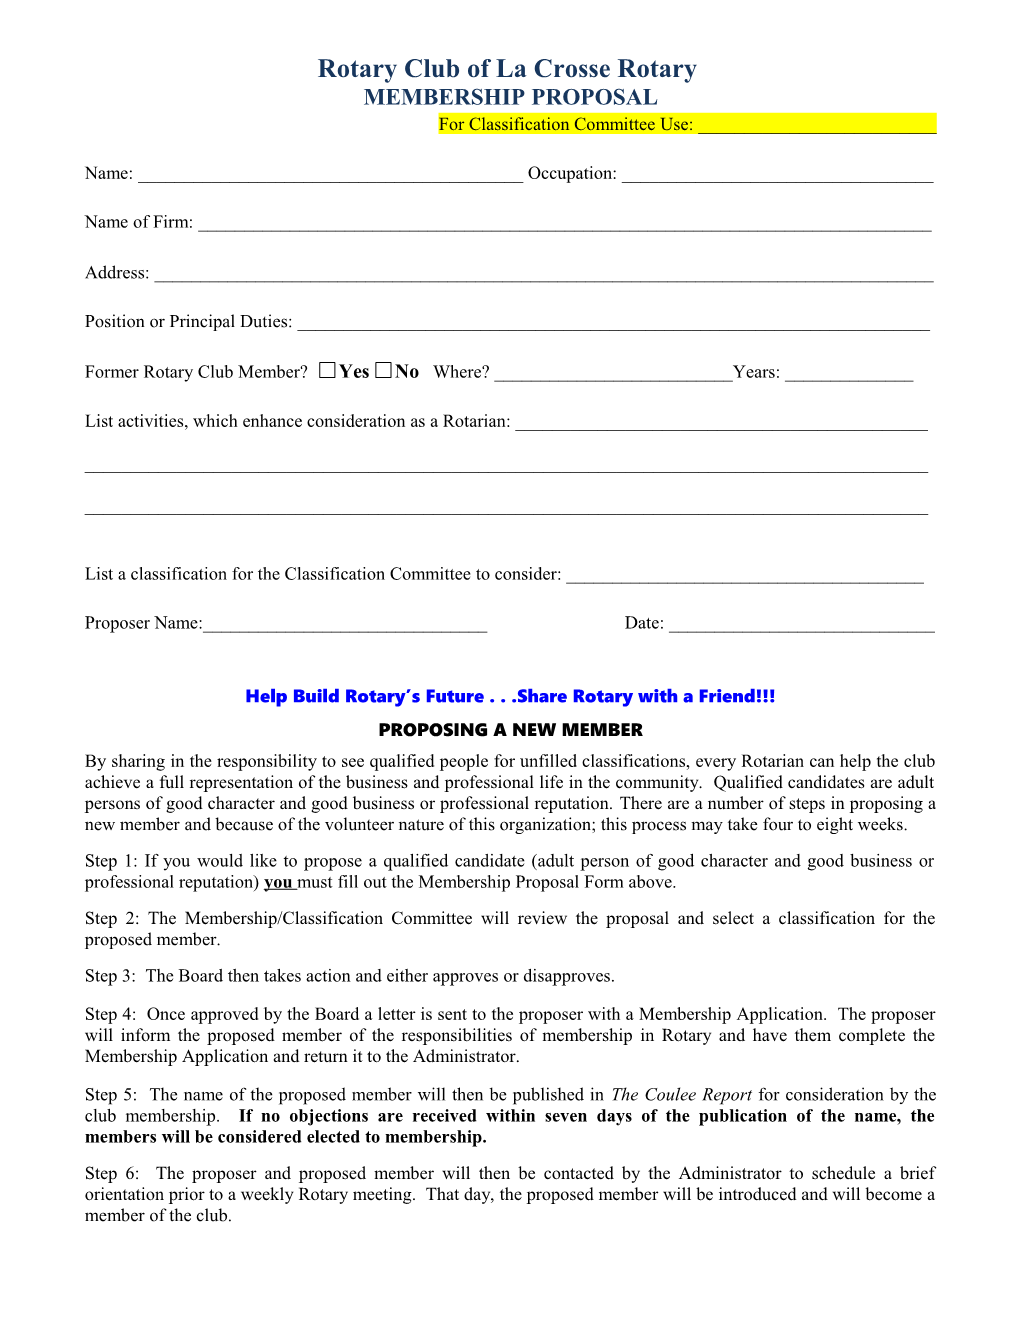 MEMBERSHIP PROPOSAL for Classification Committee Use